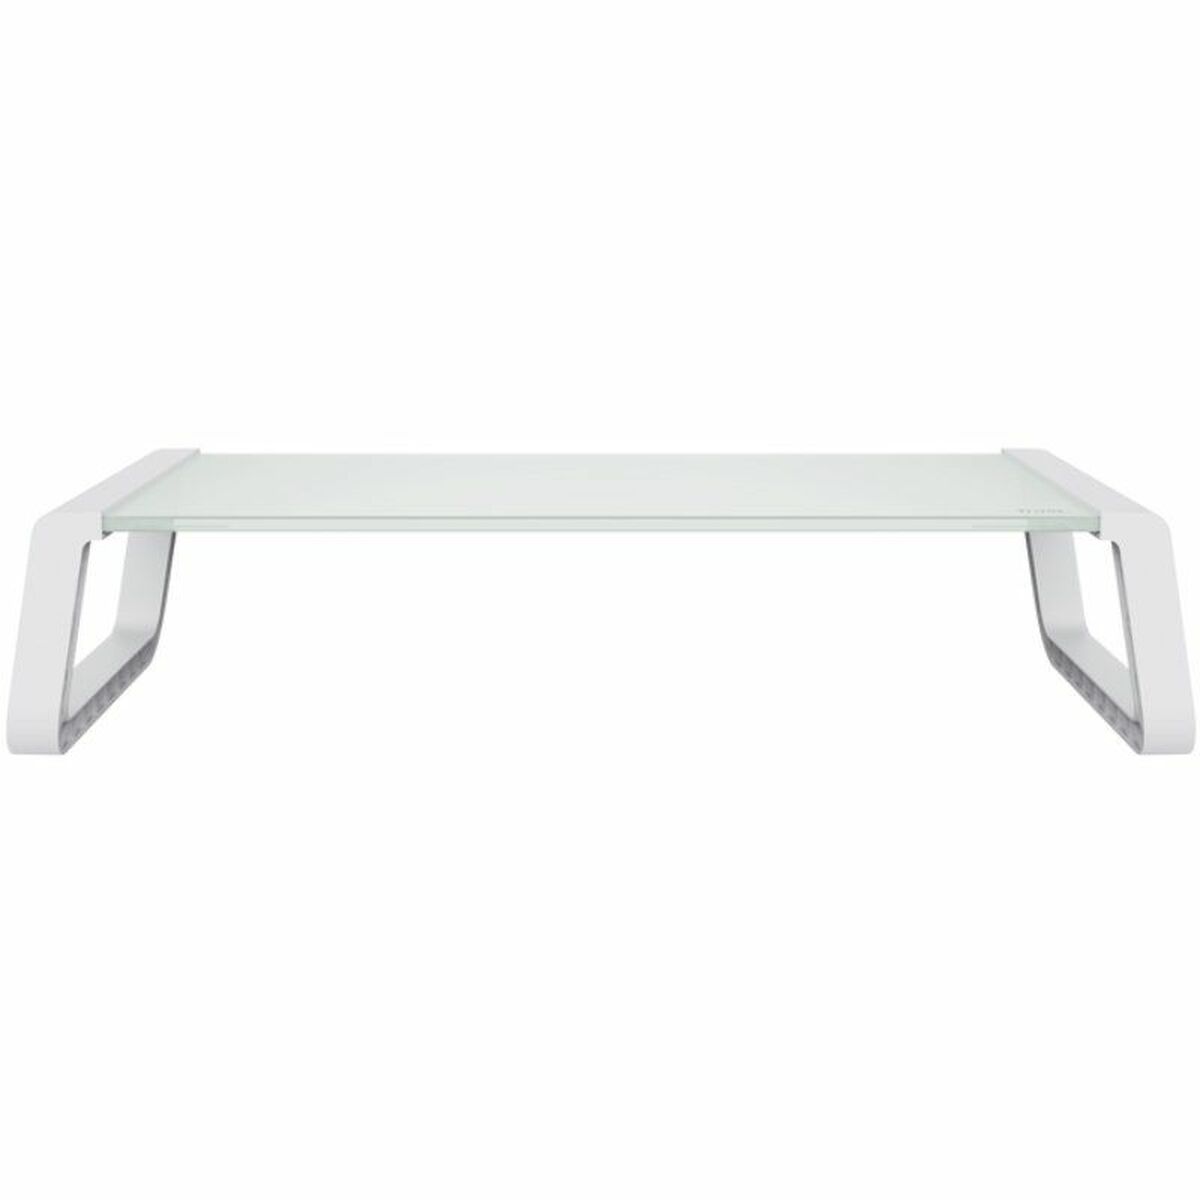 Screen Table Support Trust 10 kg